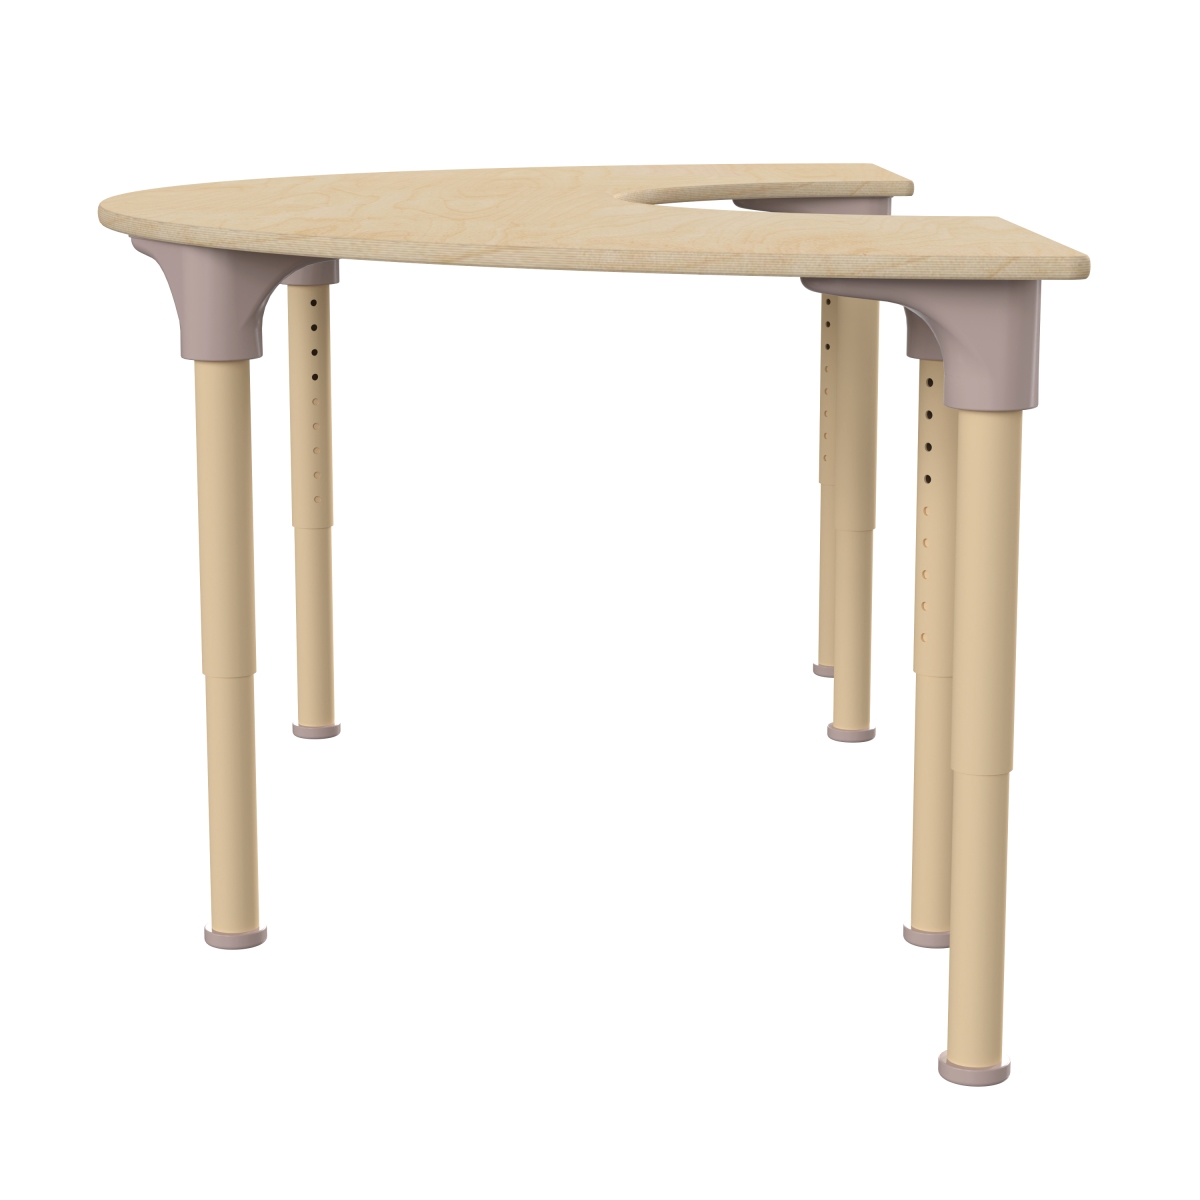 Picture of Flash Furniture MK-ME088019-GG 59 in. Bright Beginnings Commercial Grade Wooden Half Circle Adjustable Height Classroom Activity Table - Metal Legs Adjust From 15-23 in., Beech